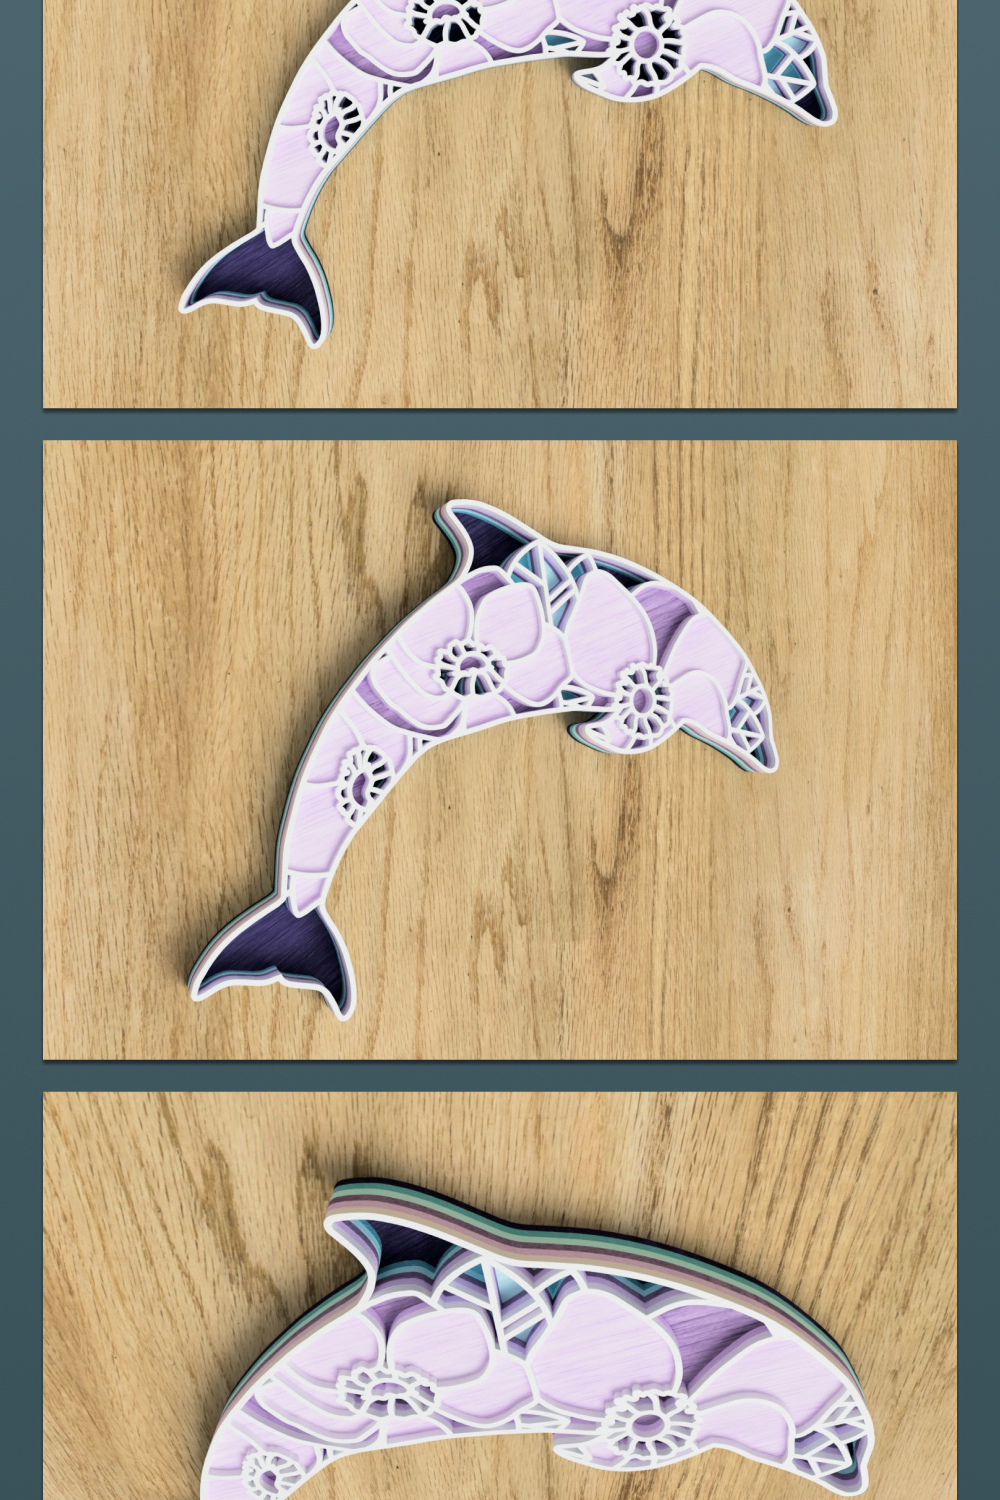 Three pictures of a dolphin on a wooden surface.